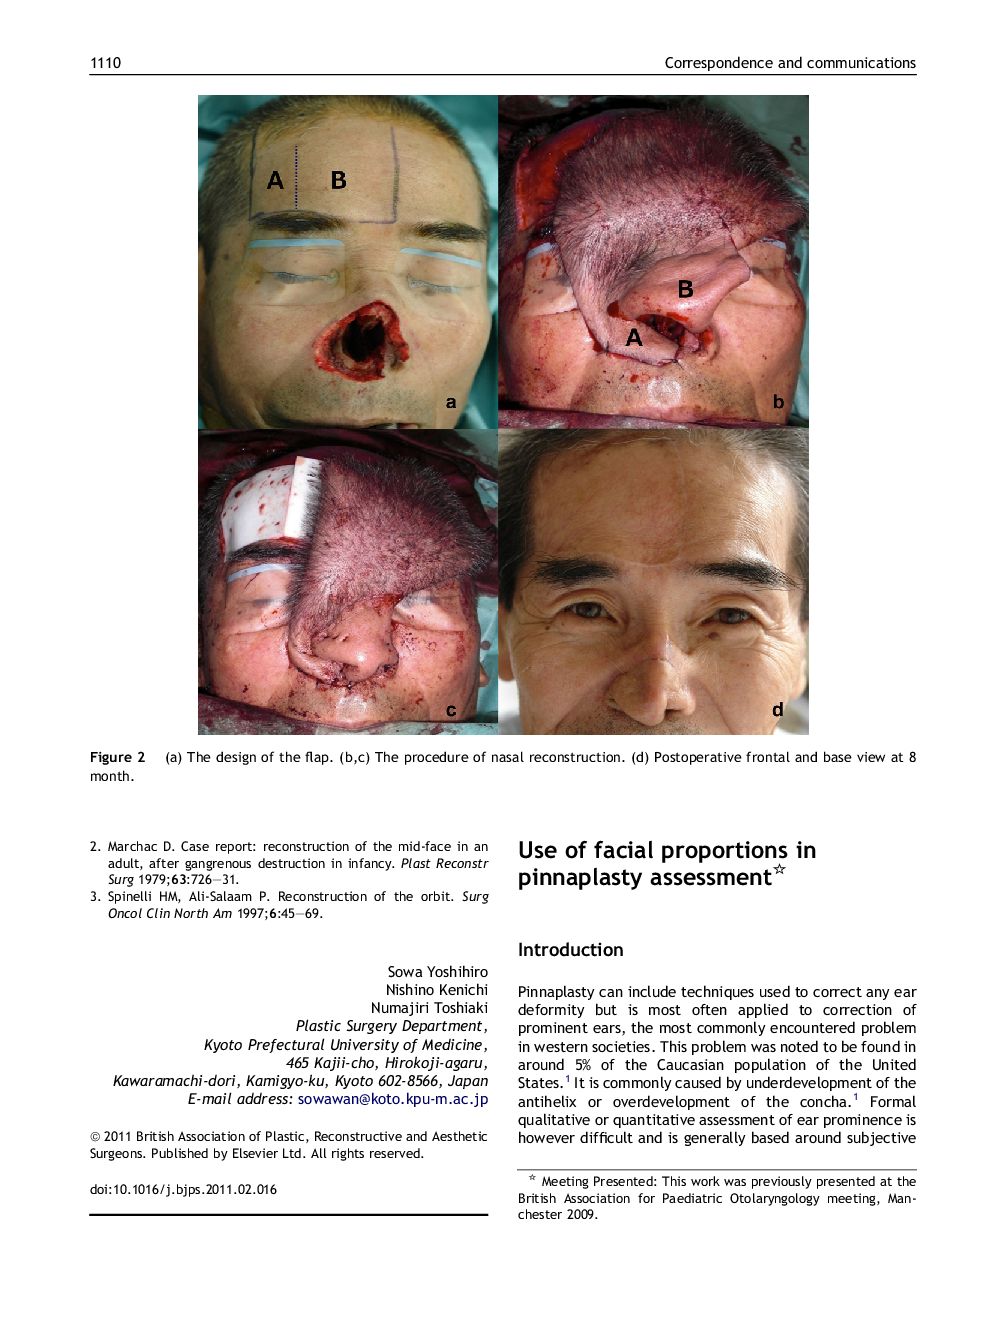 Use of facial proportions in pinnaplasty assessment